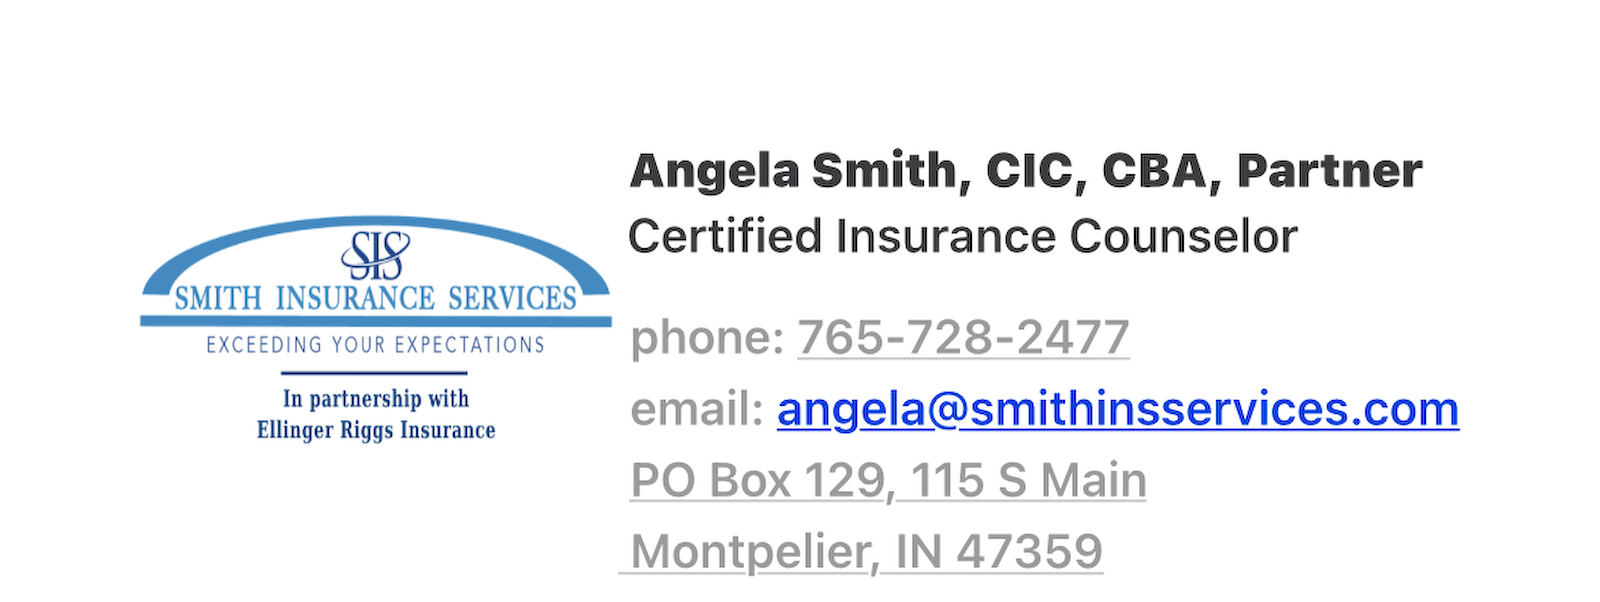 Smith Insurance Services